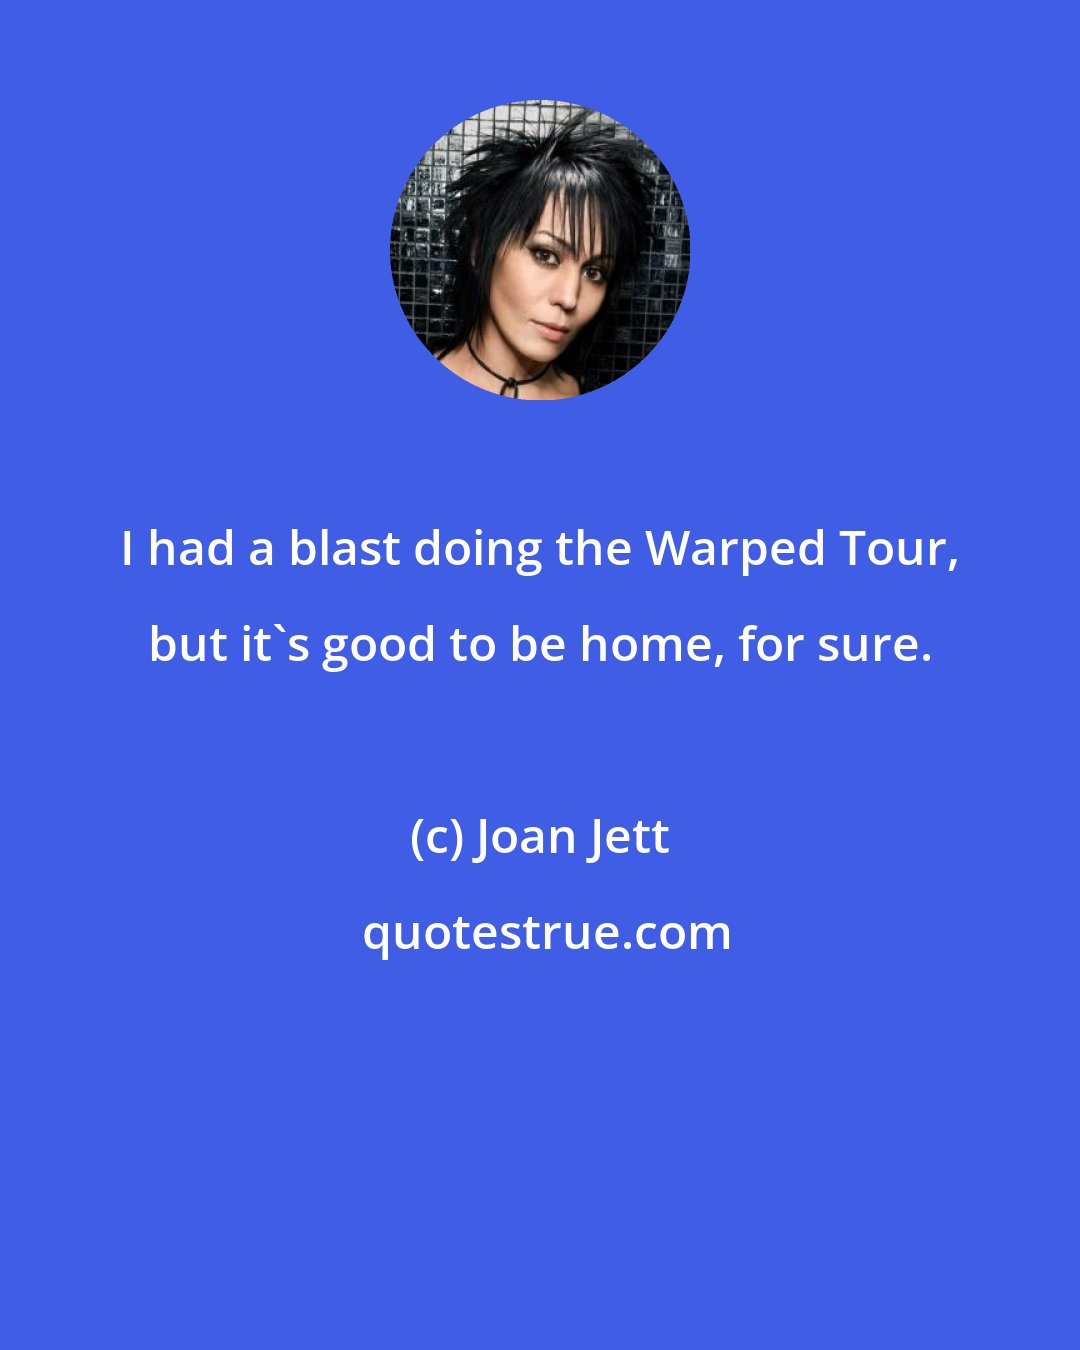 Joan Jett: I had a blast doing the Warped Tour, but it's good to be home, for sure.